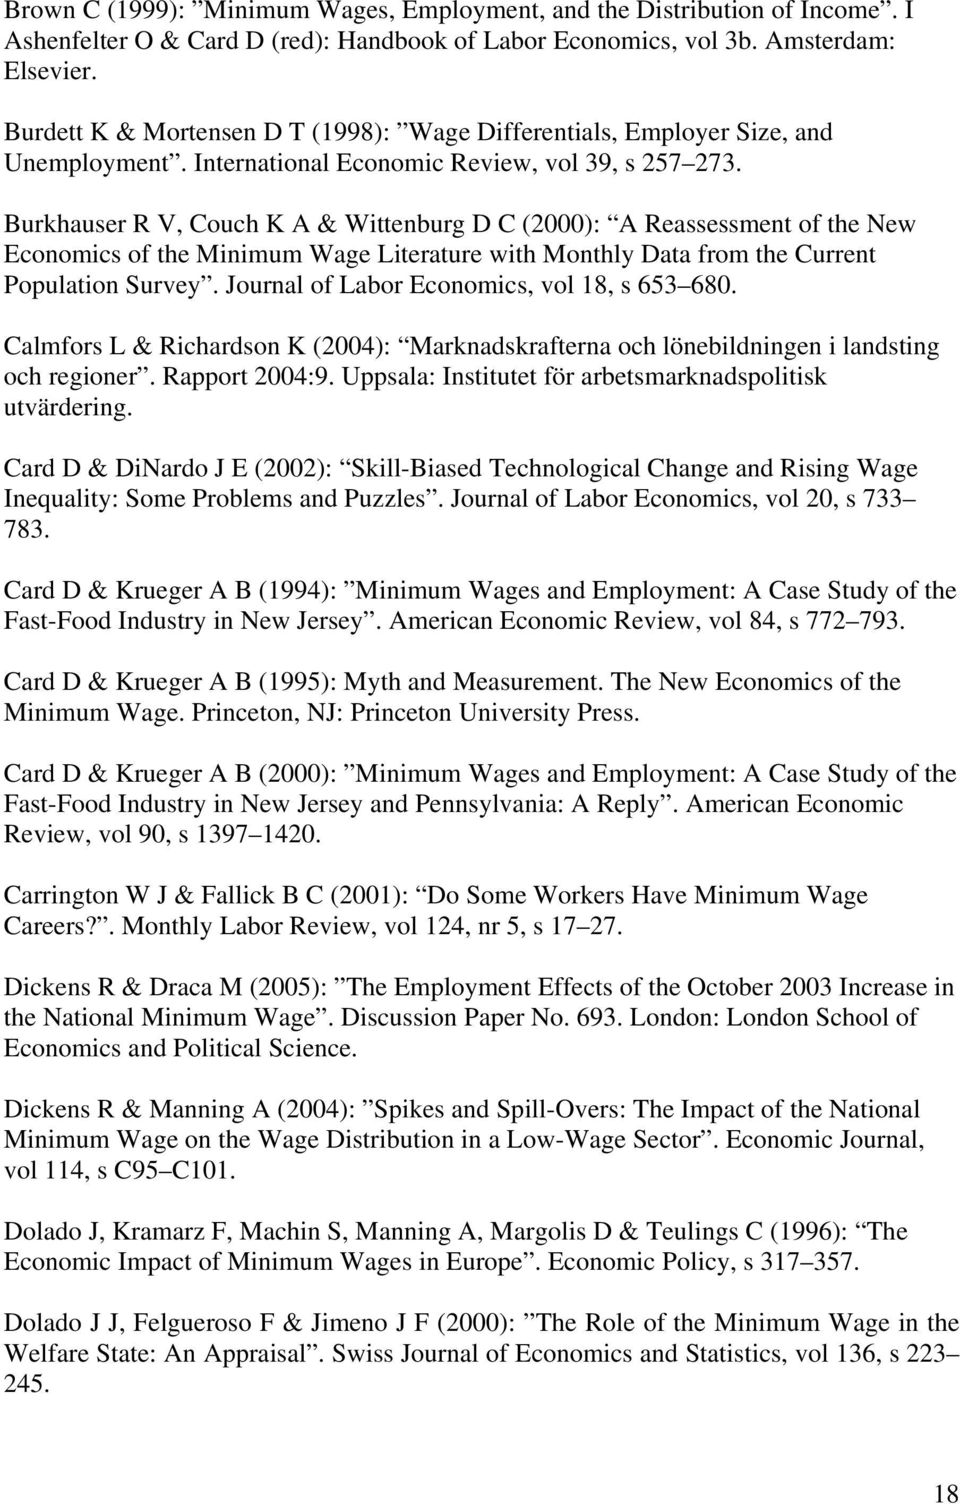 Burkhauser R V, Couch K A & Wittenburg D C (2000): A Reassessment of the New Economics of the Minimum Wage Literature with Monthly Data from the Current Population Survey.